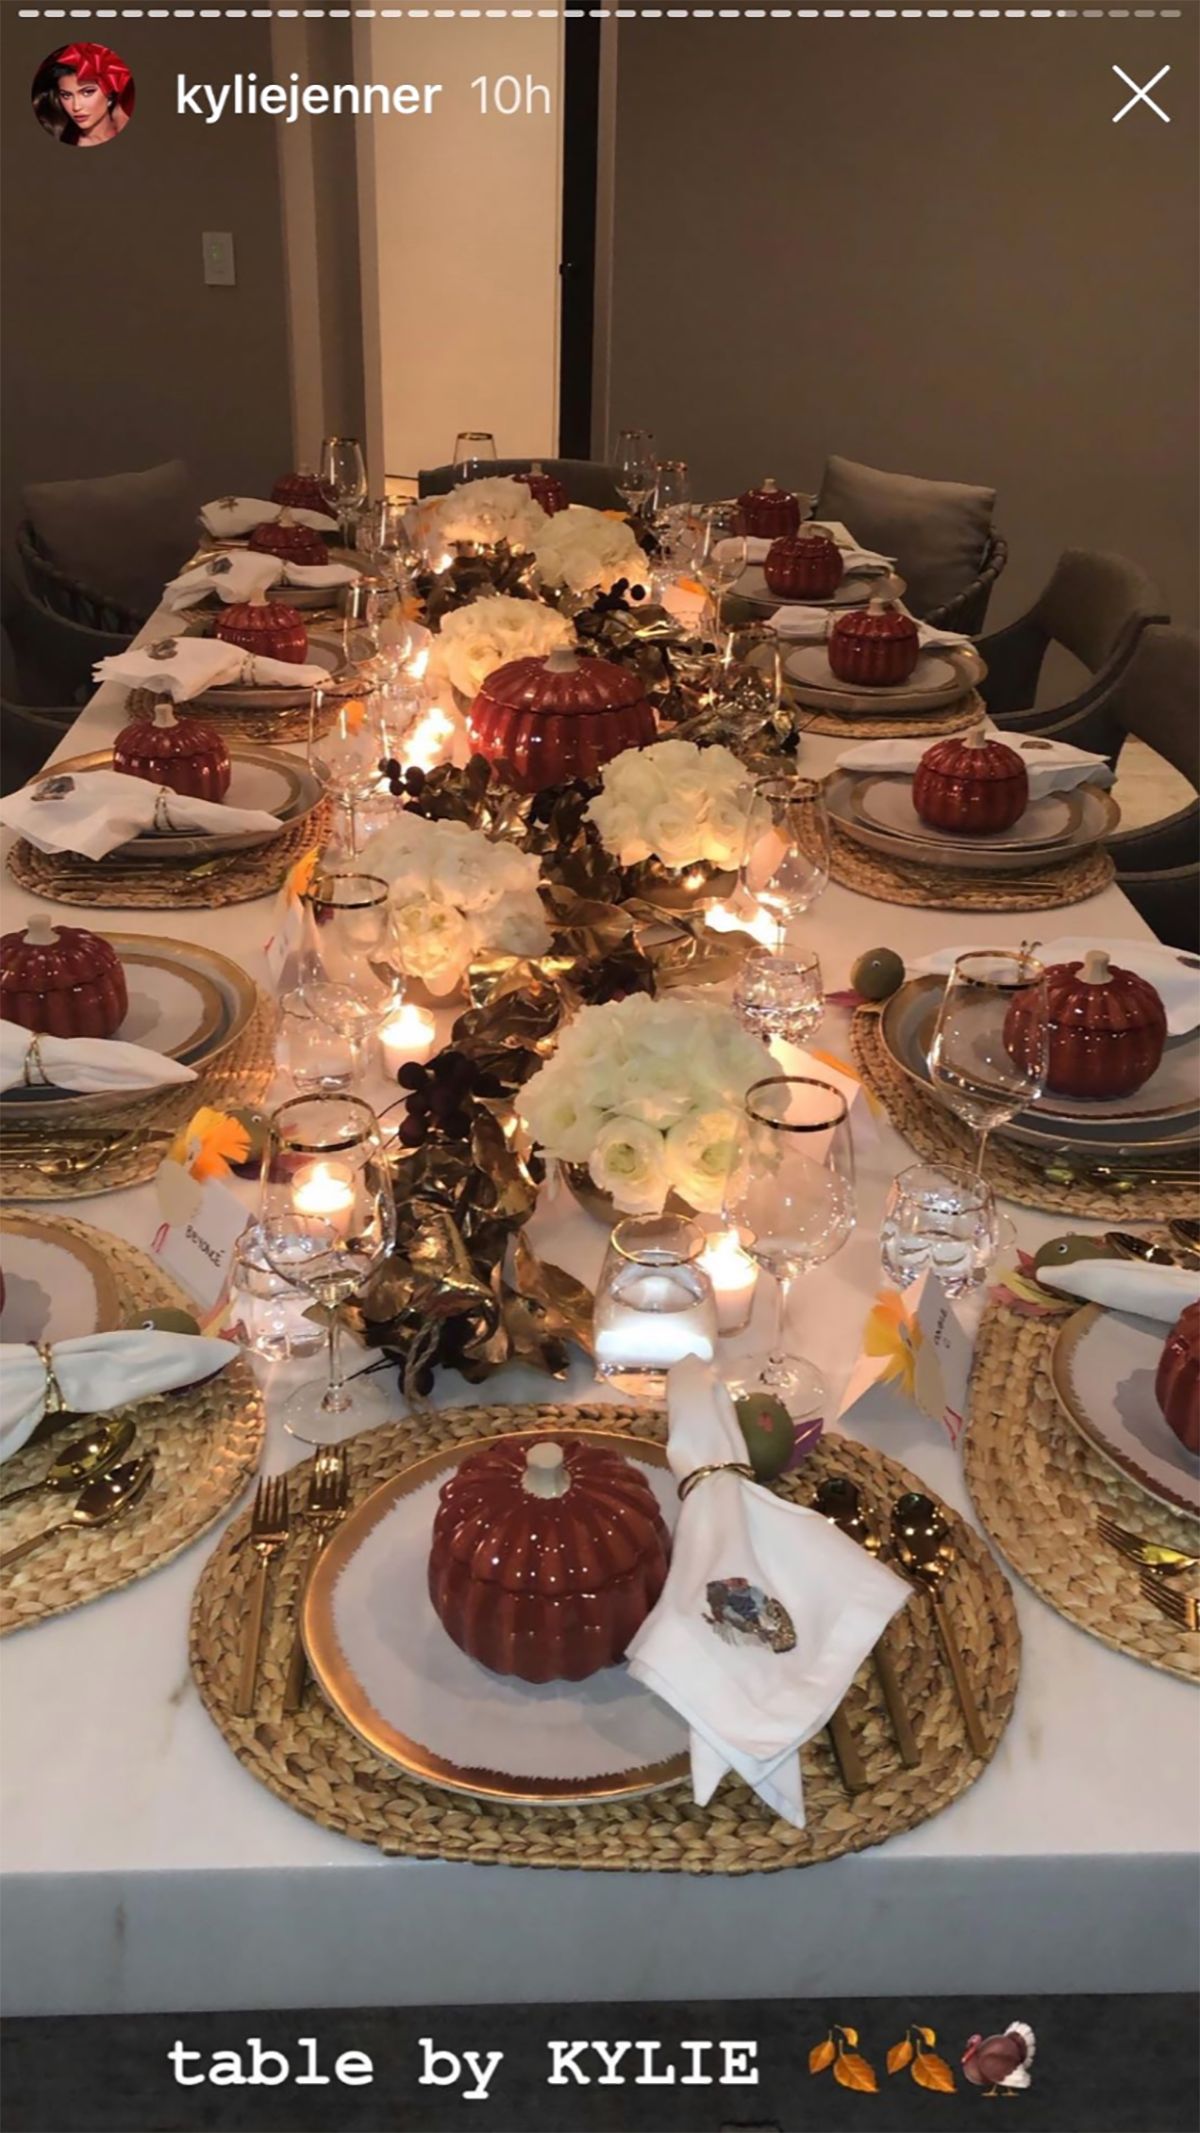 Kylie Jenner Saved Spot for Beyonce at Her Friendsgiving Table